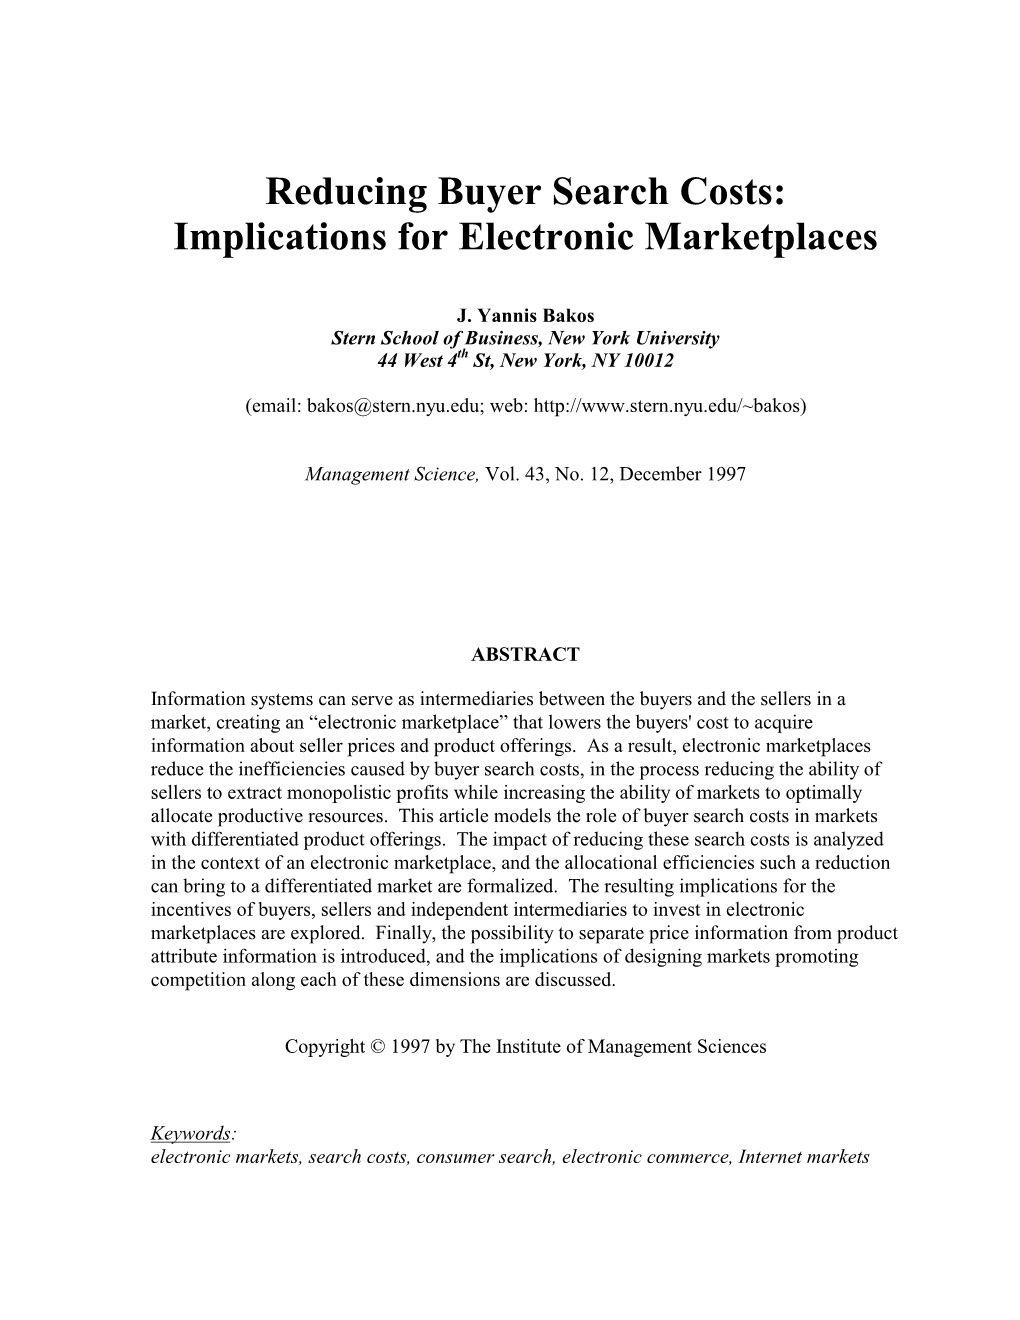 Reducing Buyer Search Costs: Implications for Electronic Marketplaces